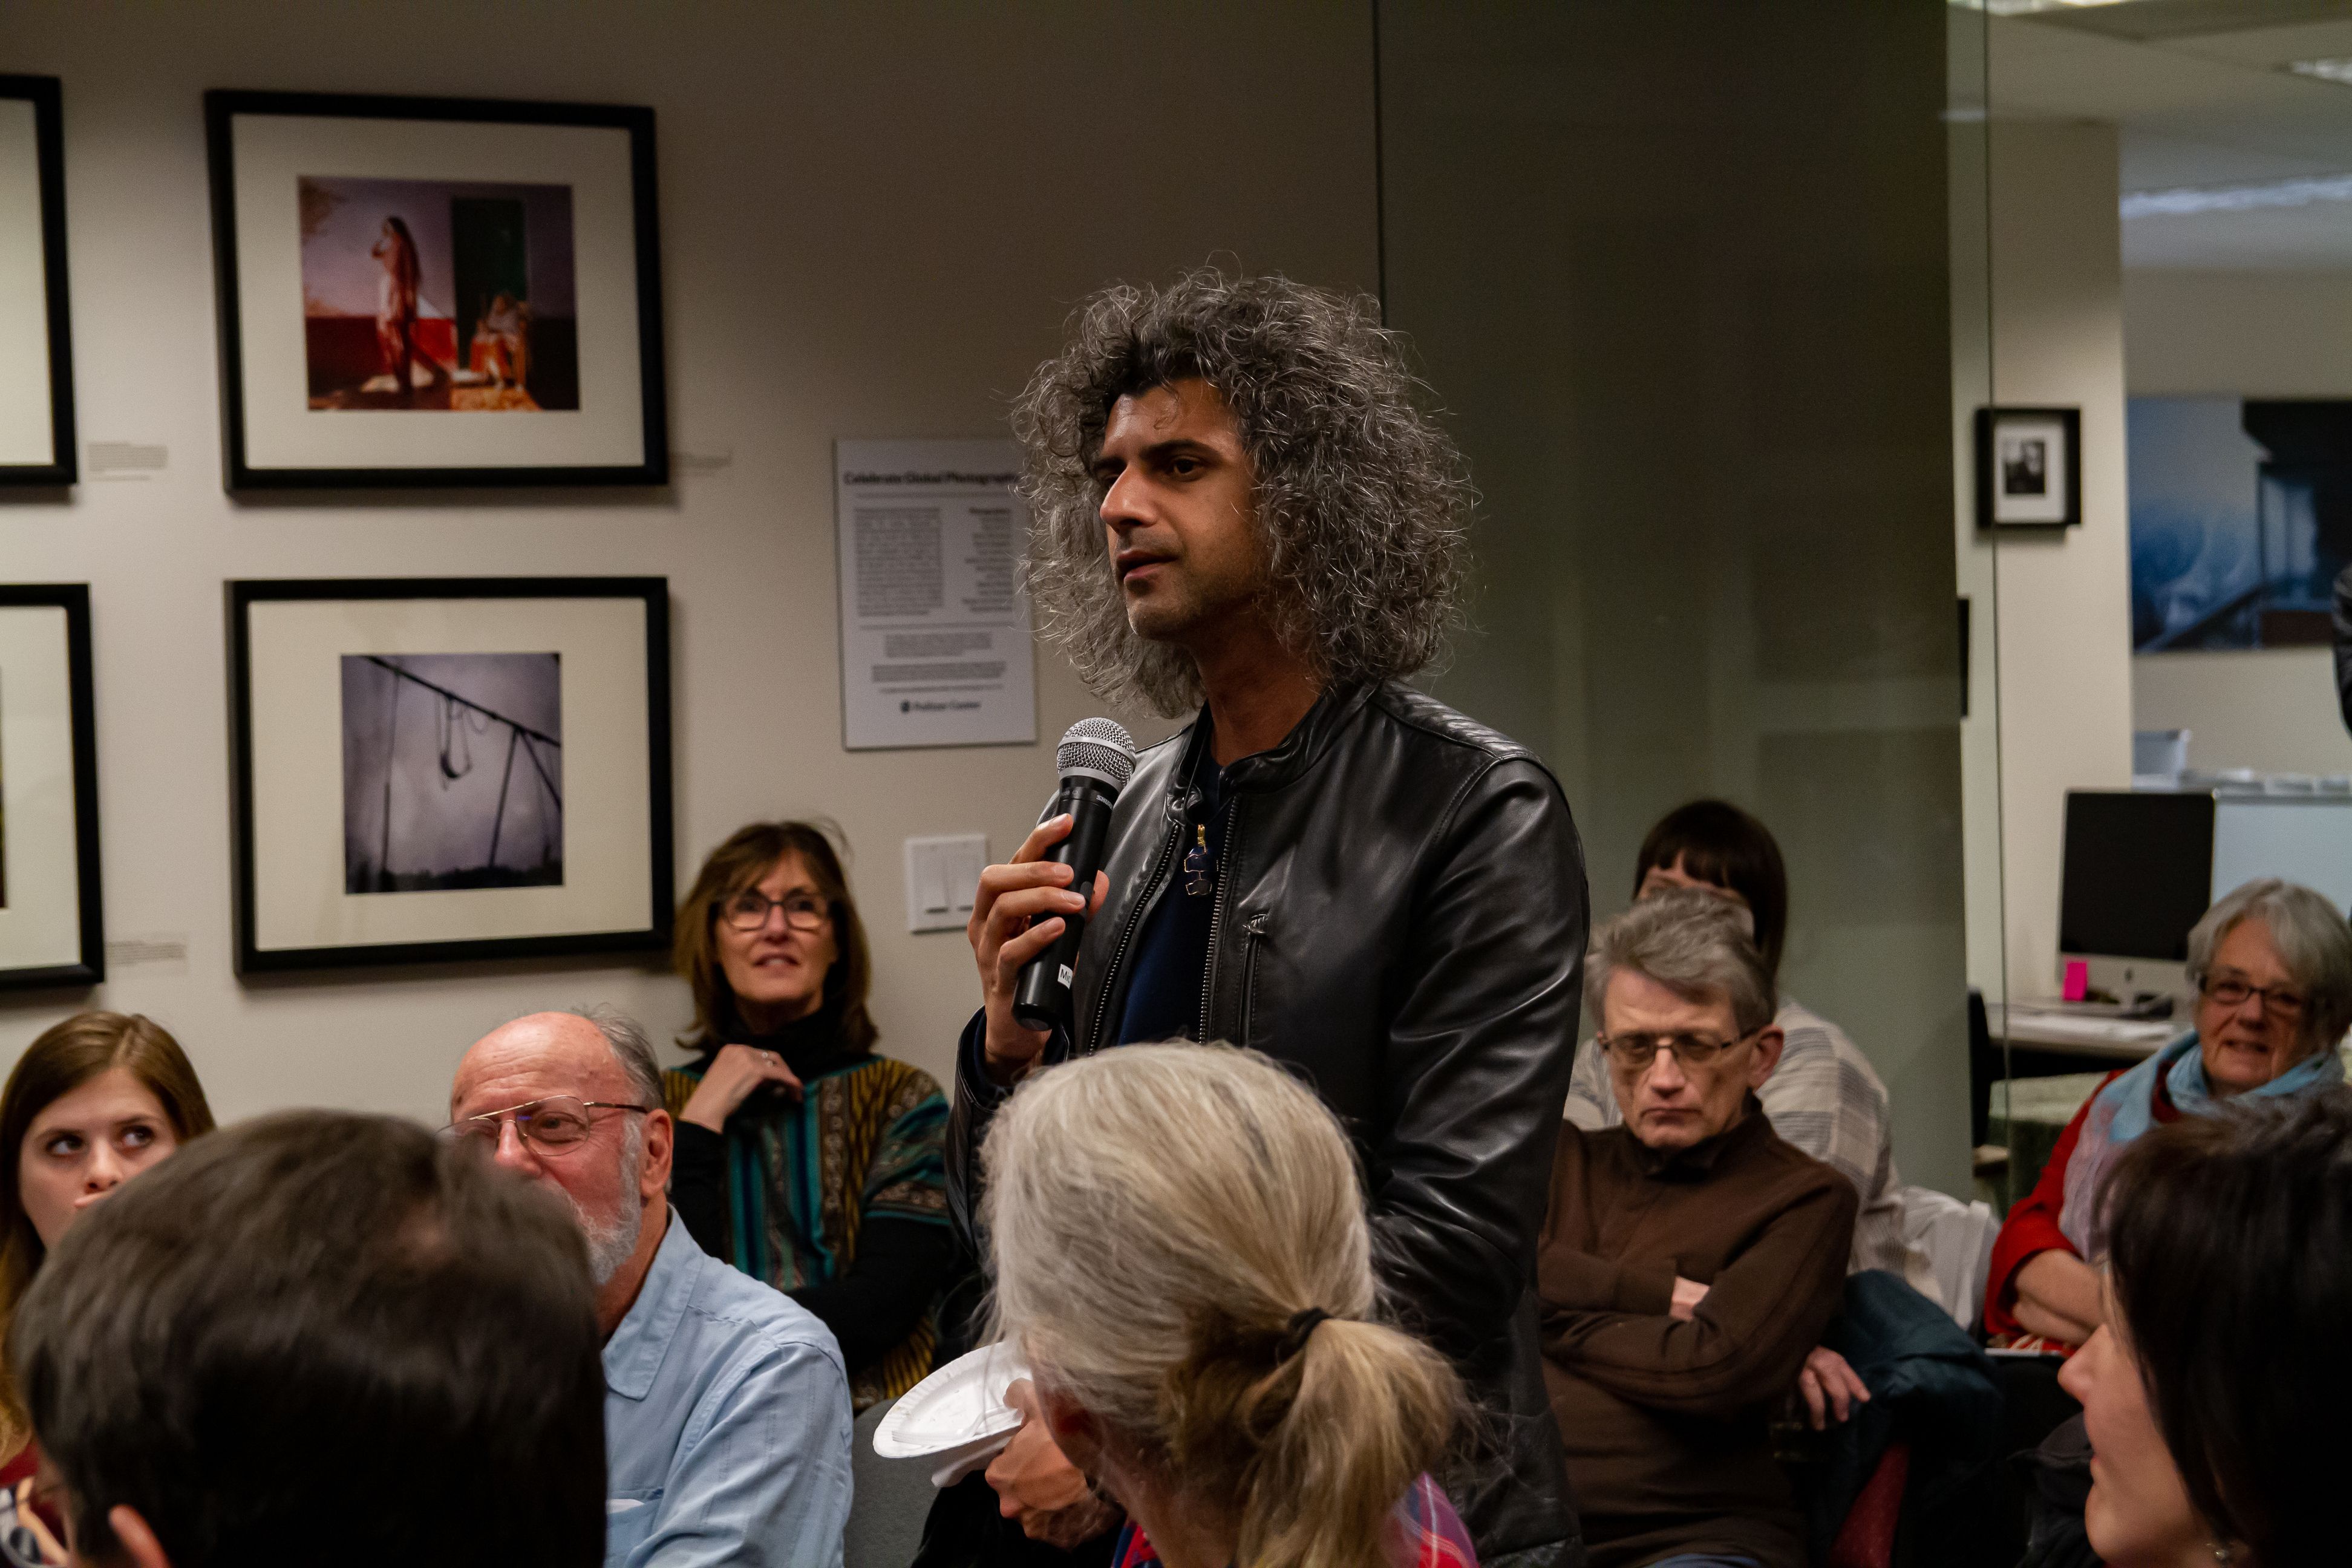 An audience member participates in the Q&A portion at Mariana Palau's Talks @ Pulitzer discussion on Monday, February 3, 2020. Image by Claire Seaton. United States, 2020.